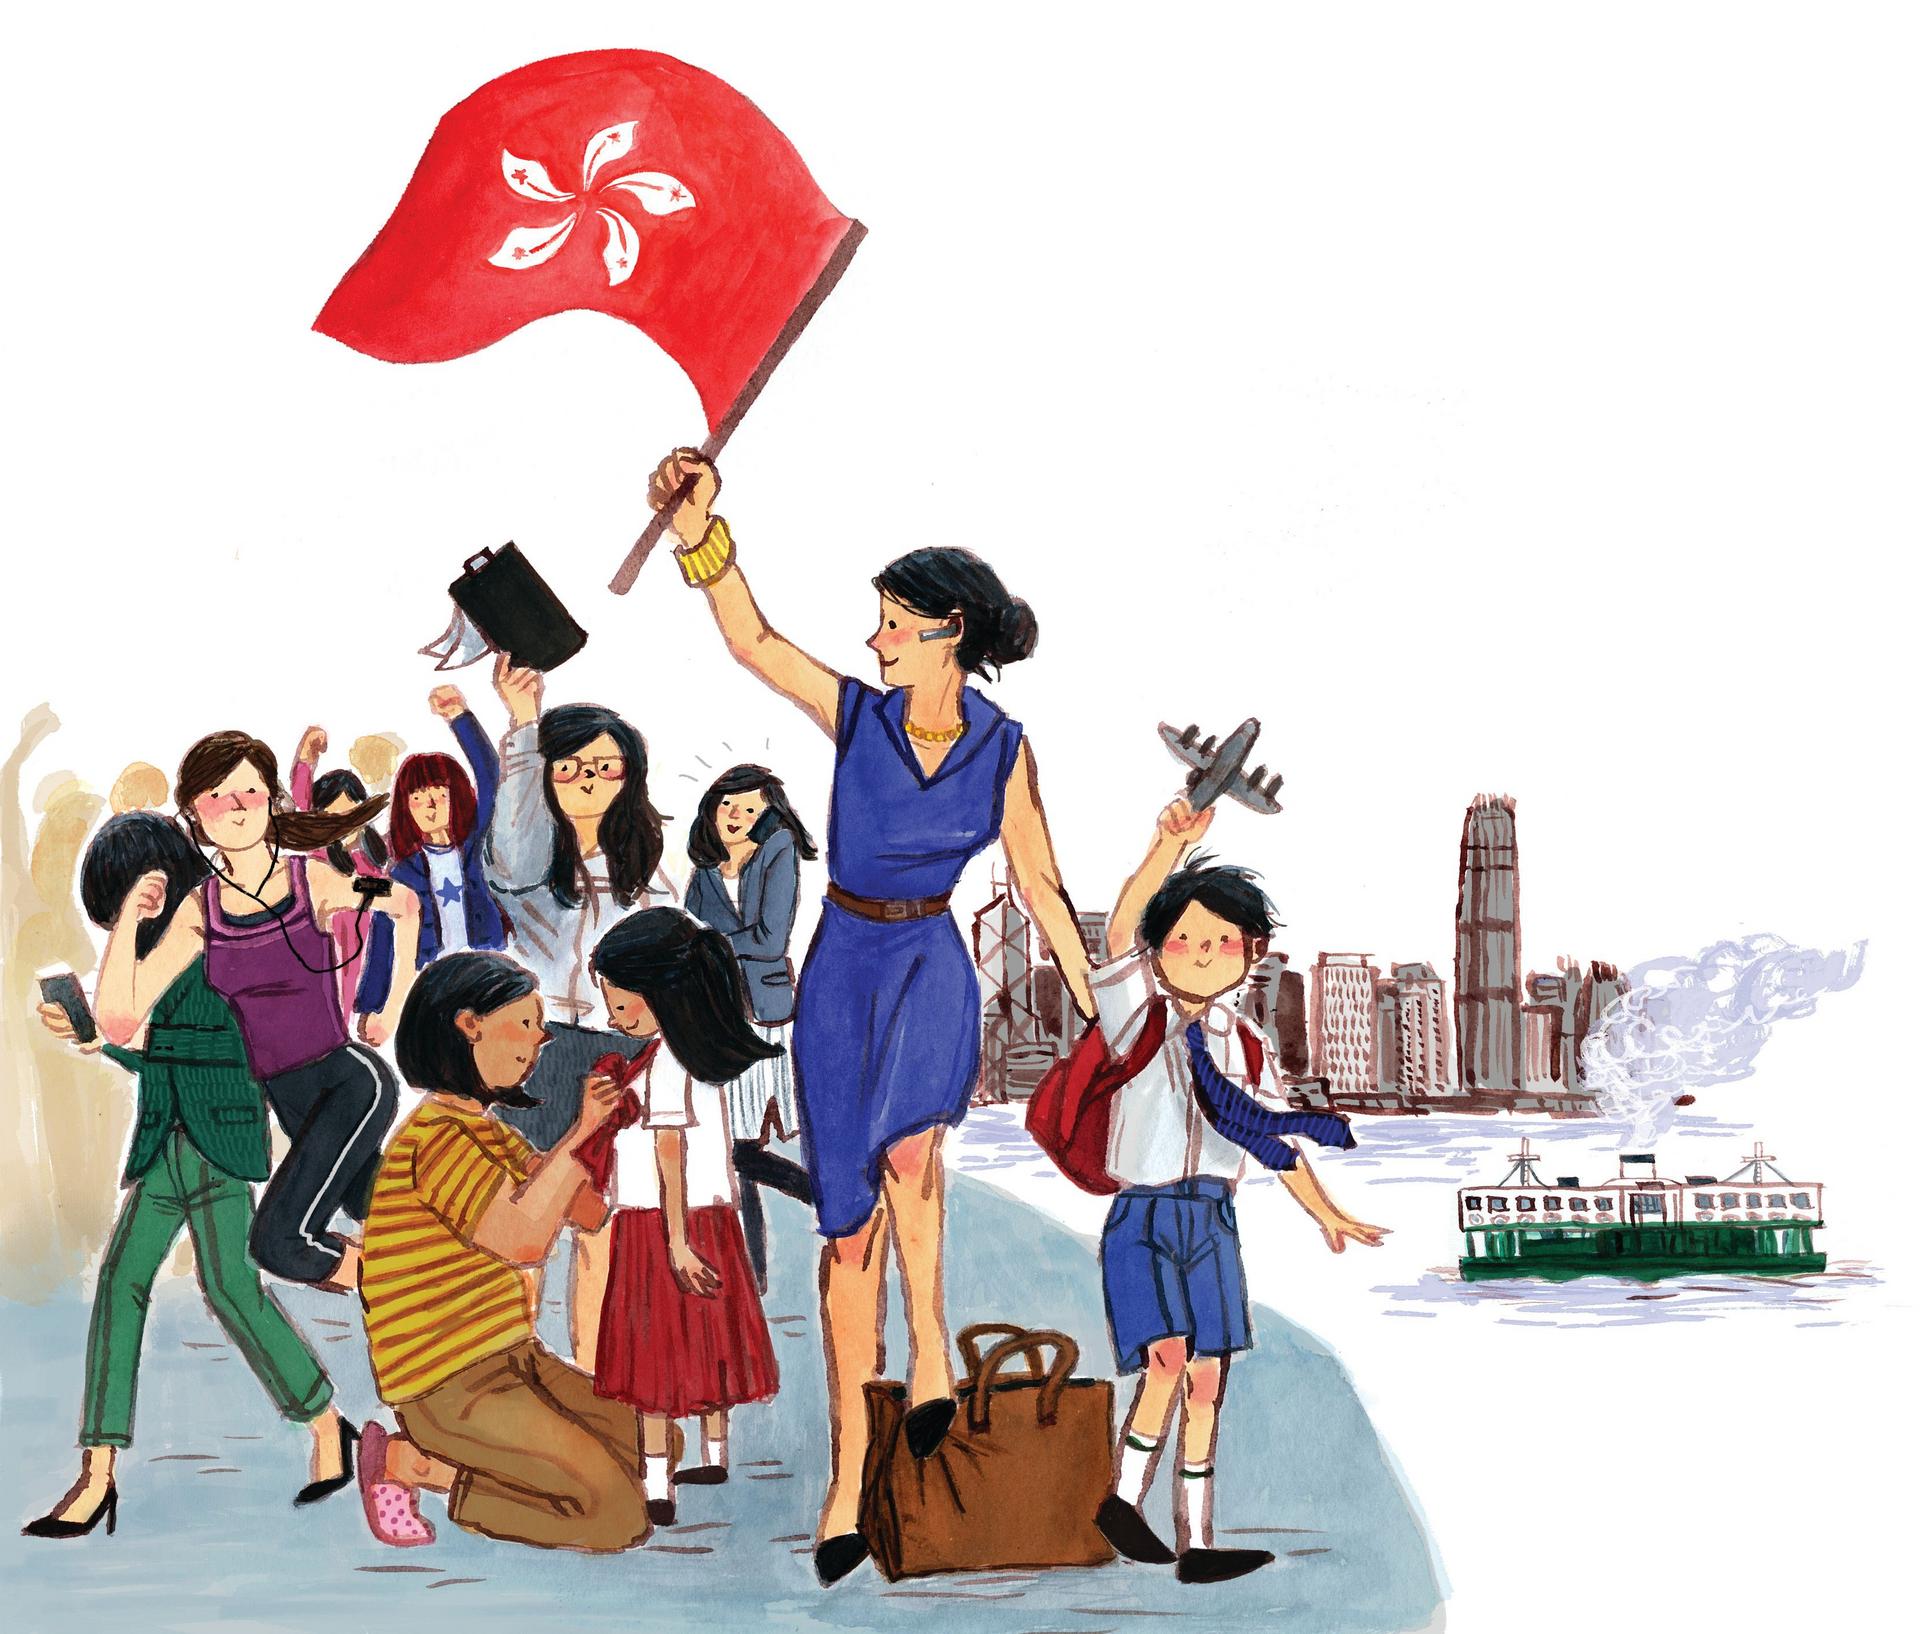 Working in Hong Kong is different from working in Britain because of Hong Kong's strong work ethic